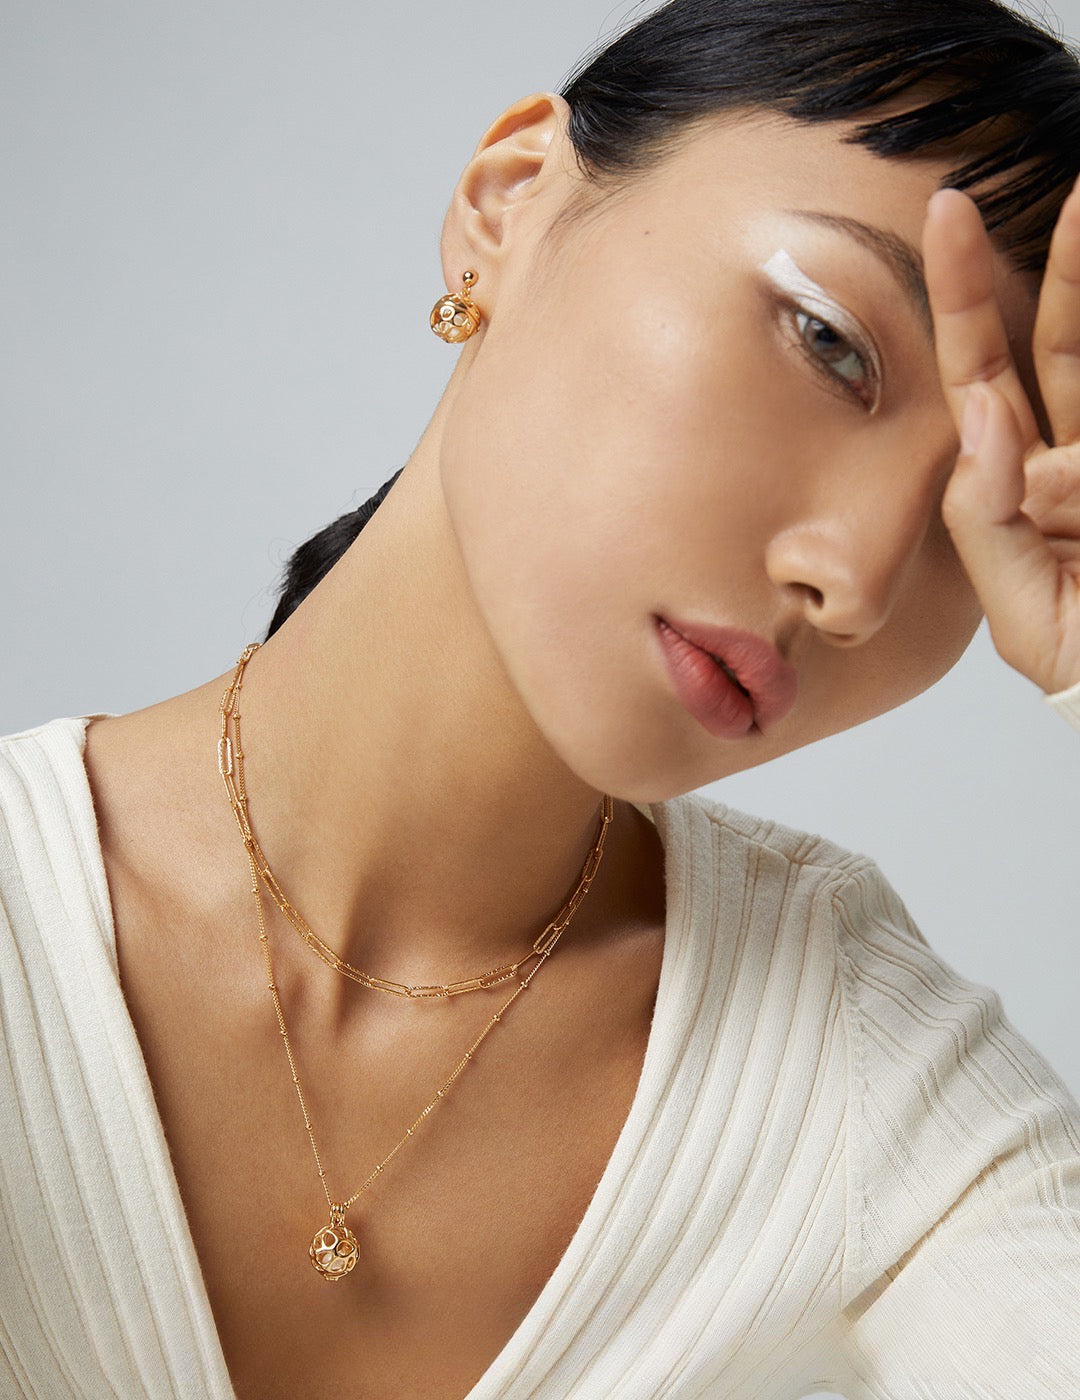 Necklace Embracing the Beauty of Simplicity - S925 Sterling Silver with 18K Gold Vermeil - Elevate your style with these stunning pieces that capture the essence of beauty. Designed to make you shine, these necklaces are a must-have for any occasion.